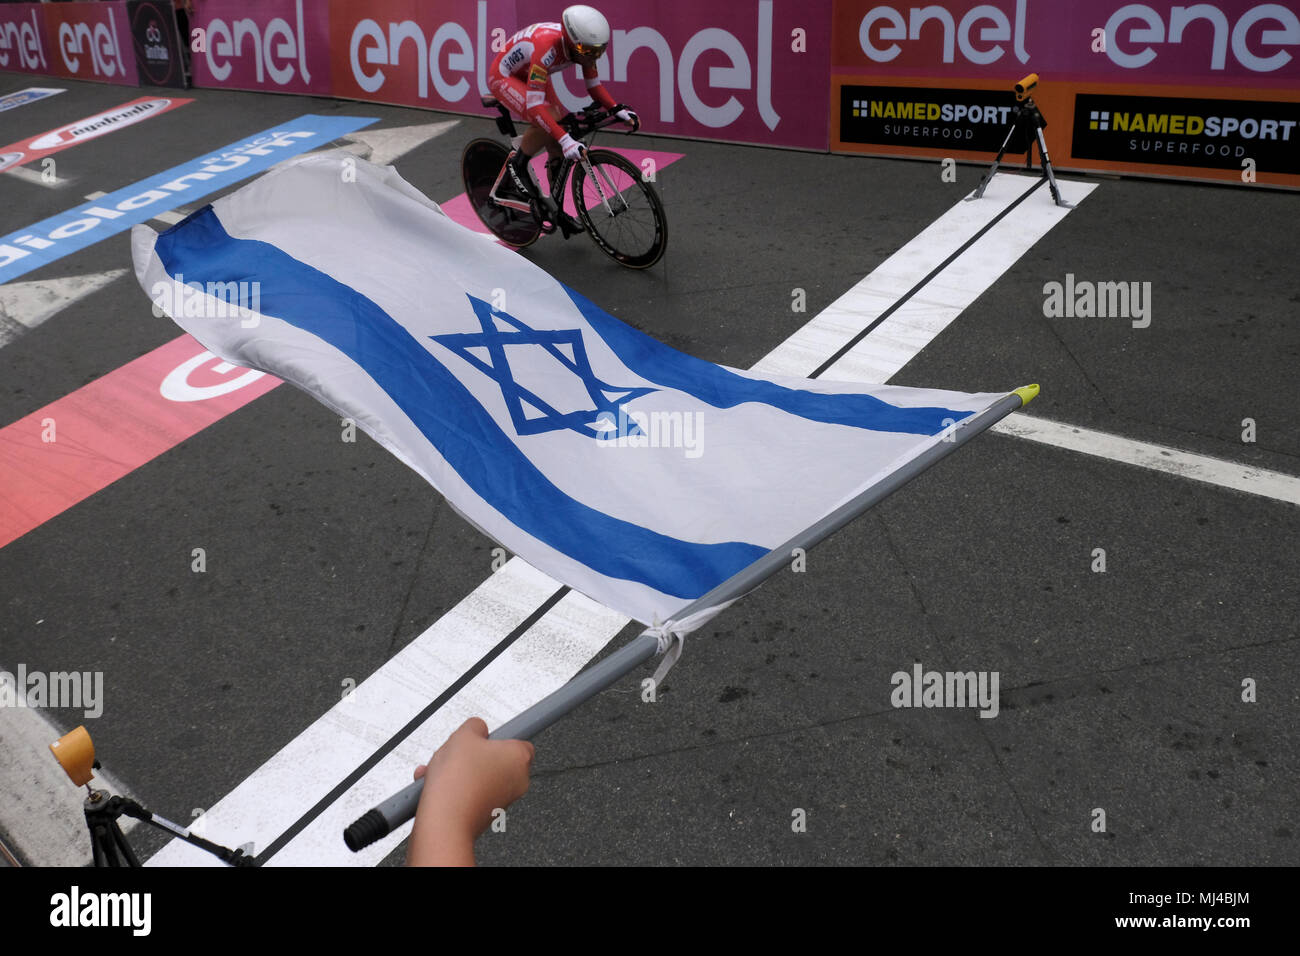 Jerusalem, Israel, 04 May 2018. A spectator waves with the Israeli flag as a cyclist from EF Education First-Drapac p/b Cannondale team crosses the finish line at the end of the 9,7 kilometers individual time-trial during the 1st stage of the 101st Giro d'Italia, Tour of Italy taking place in Jerusalem. The race's 'Big Start', beginning today, marks the first time any of cycling's three major races -- the Giro, Tour de France and Vuelta a Espana -- will begin outside of Europe. Credit: Eddie Gerald/Alamy Live News Stock Photo